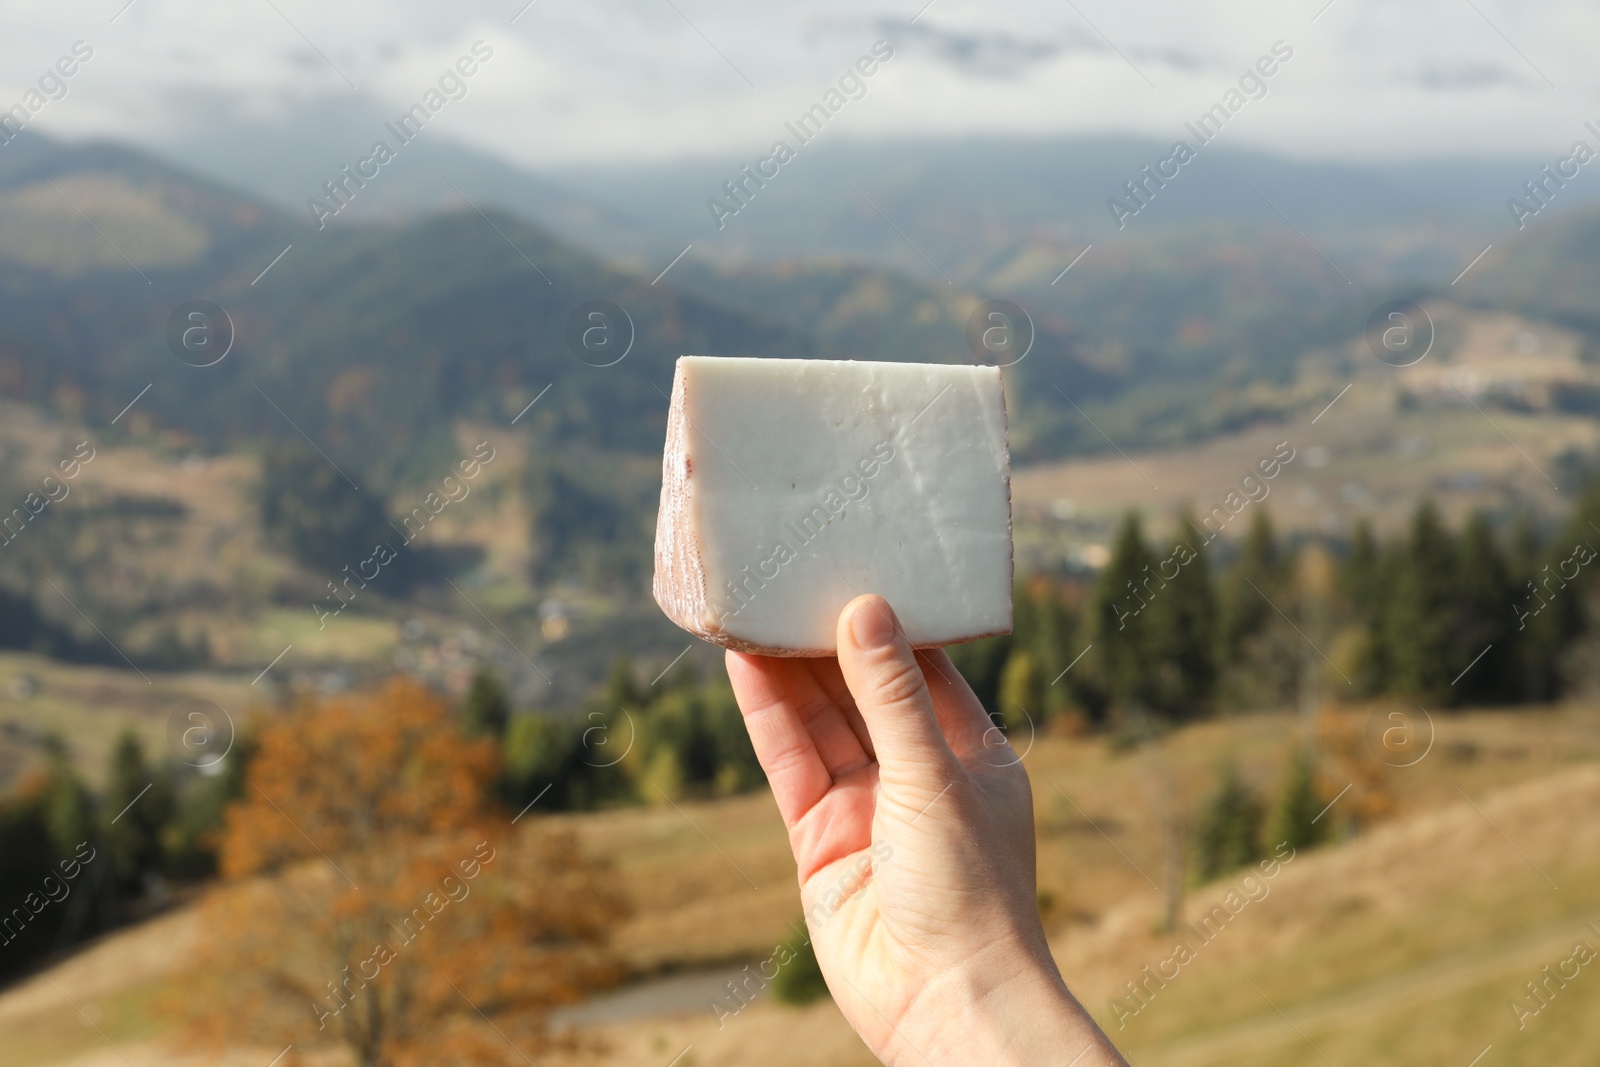 Photo of Woman holding piece of delicious cheese against mountain landscape, closeup